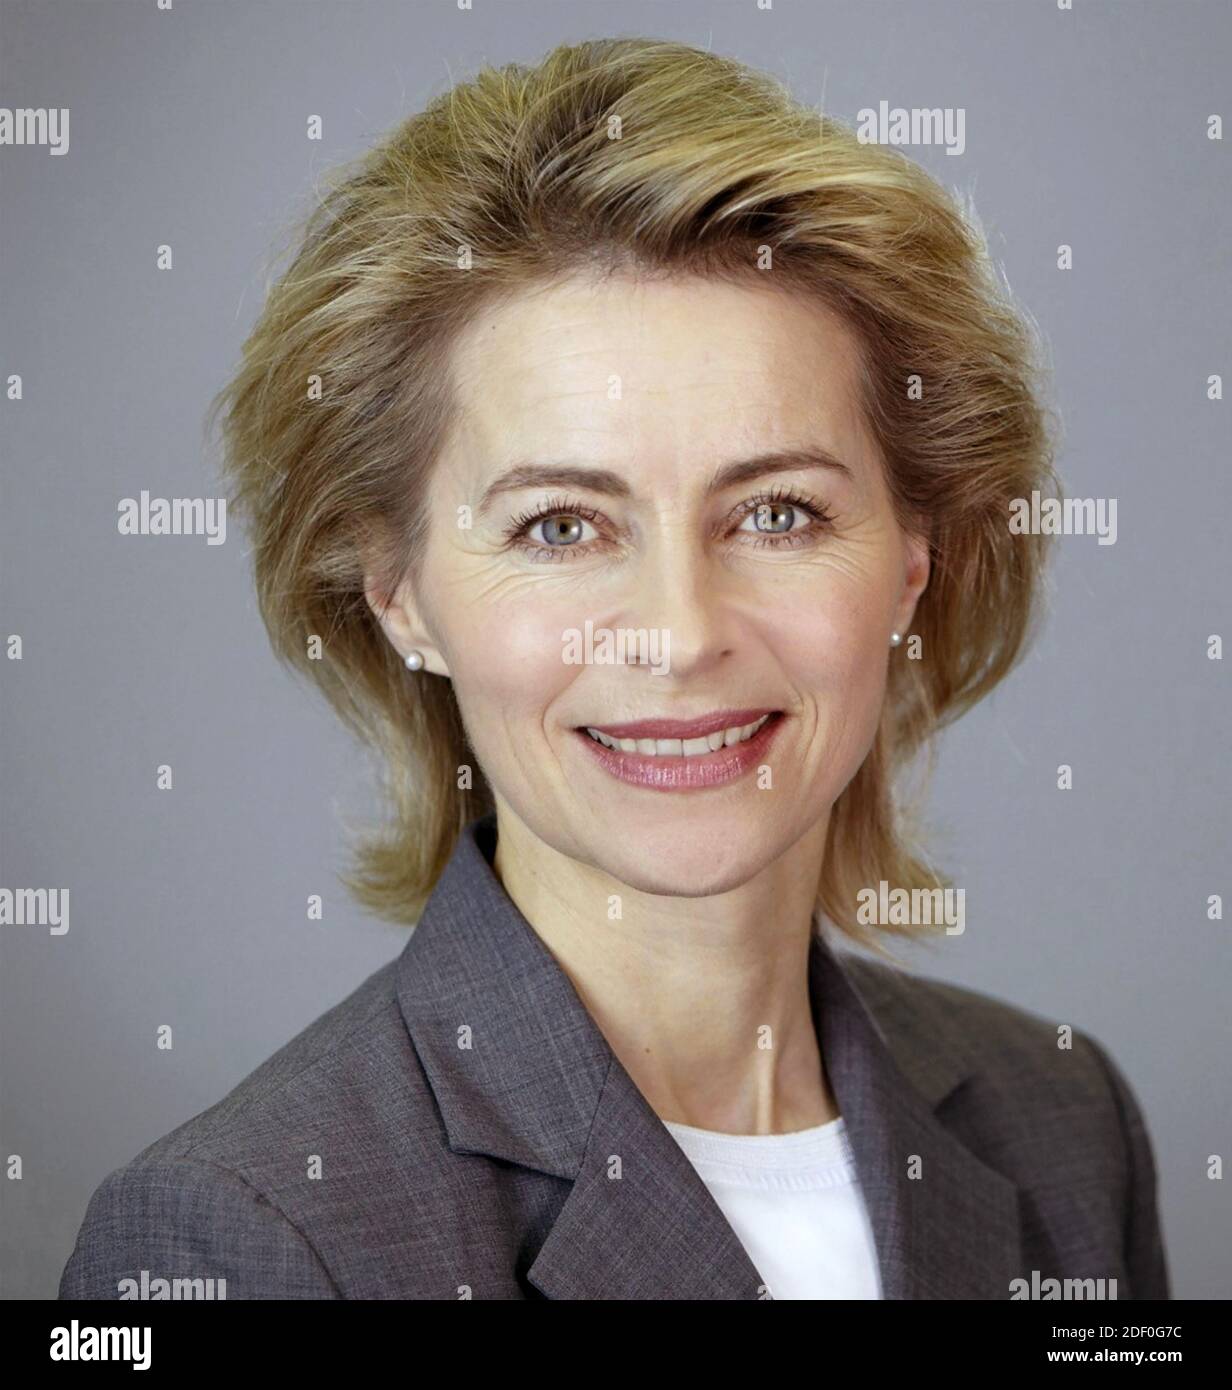 URSULA von der LEYEN German politician and President of the European Commission in 2019, phito dated 2010 Stock Photo